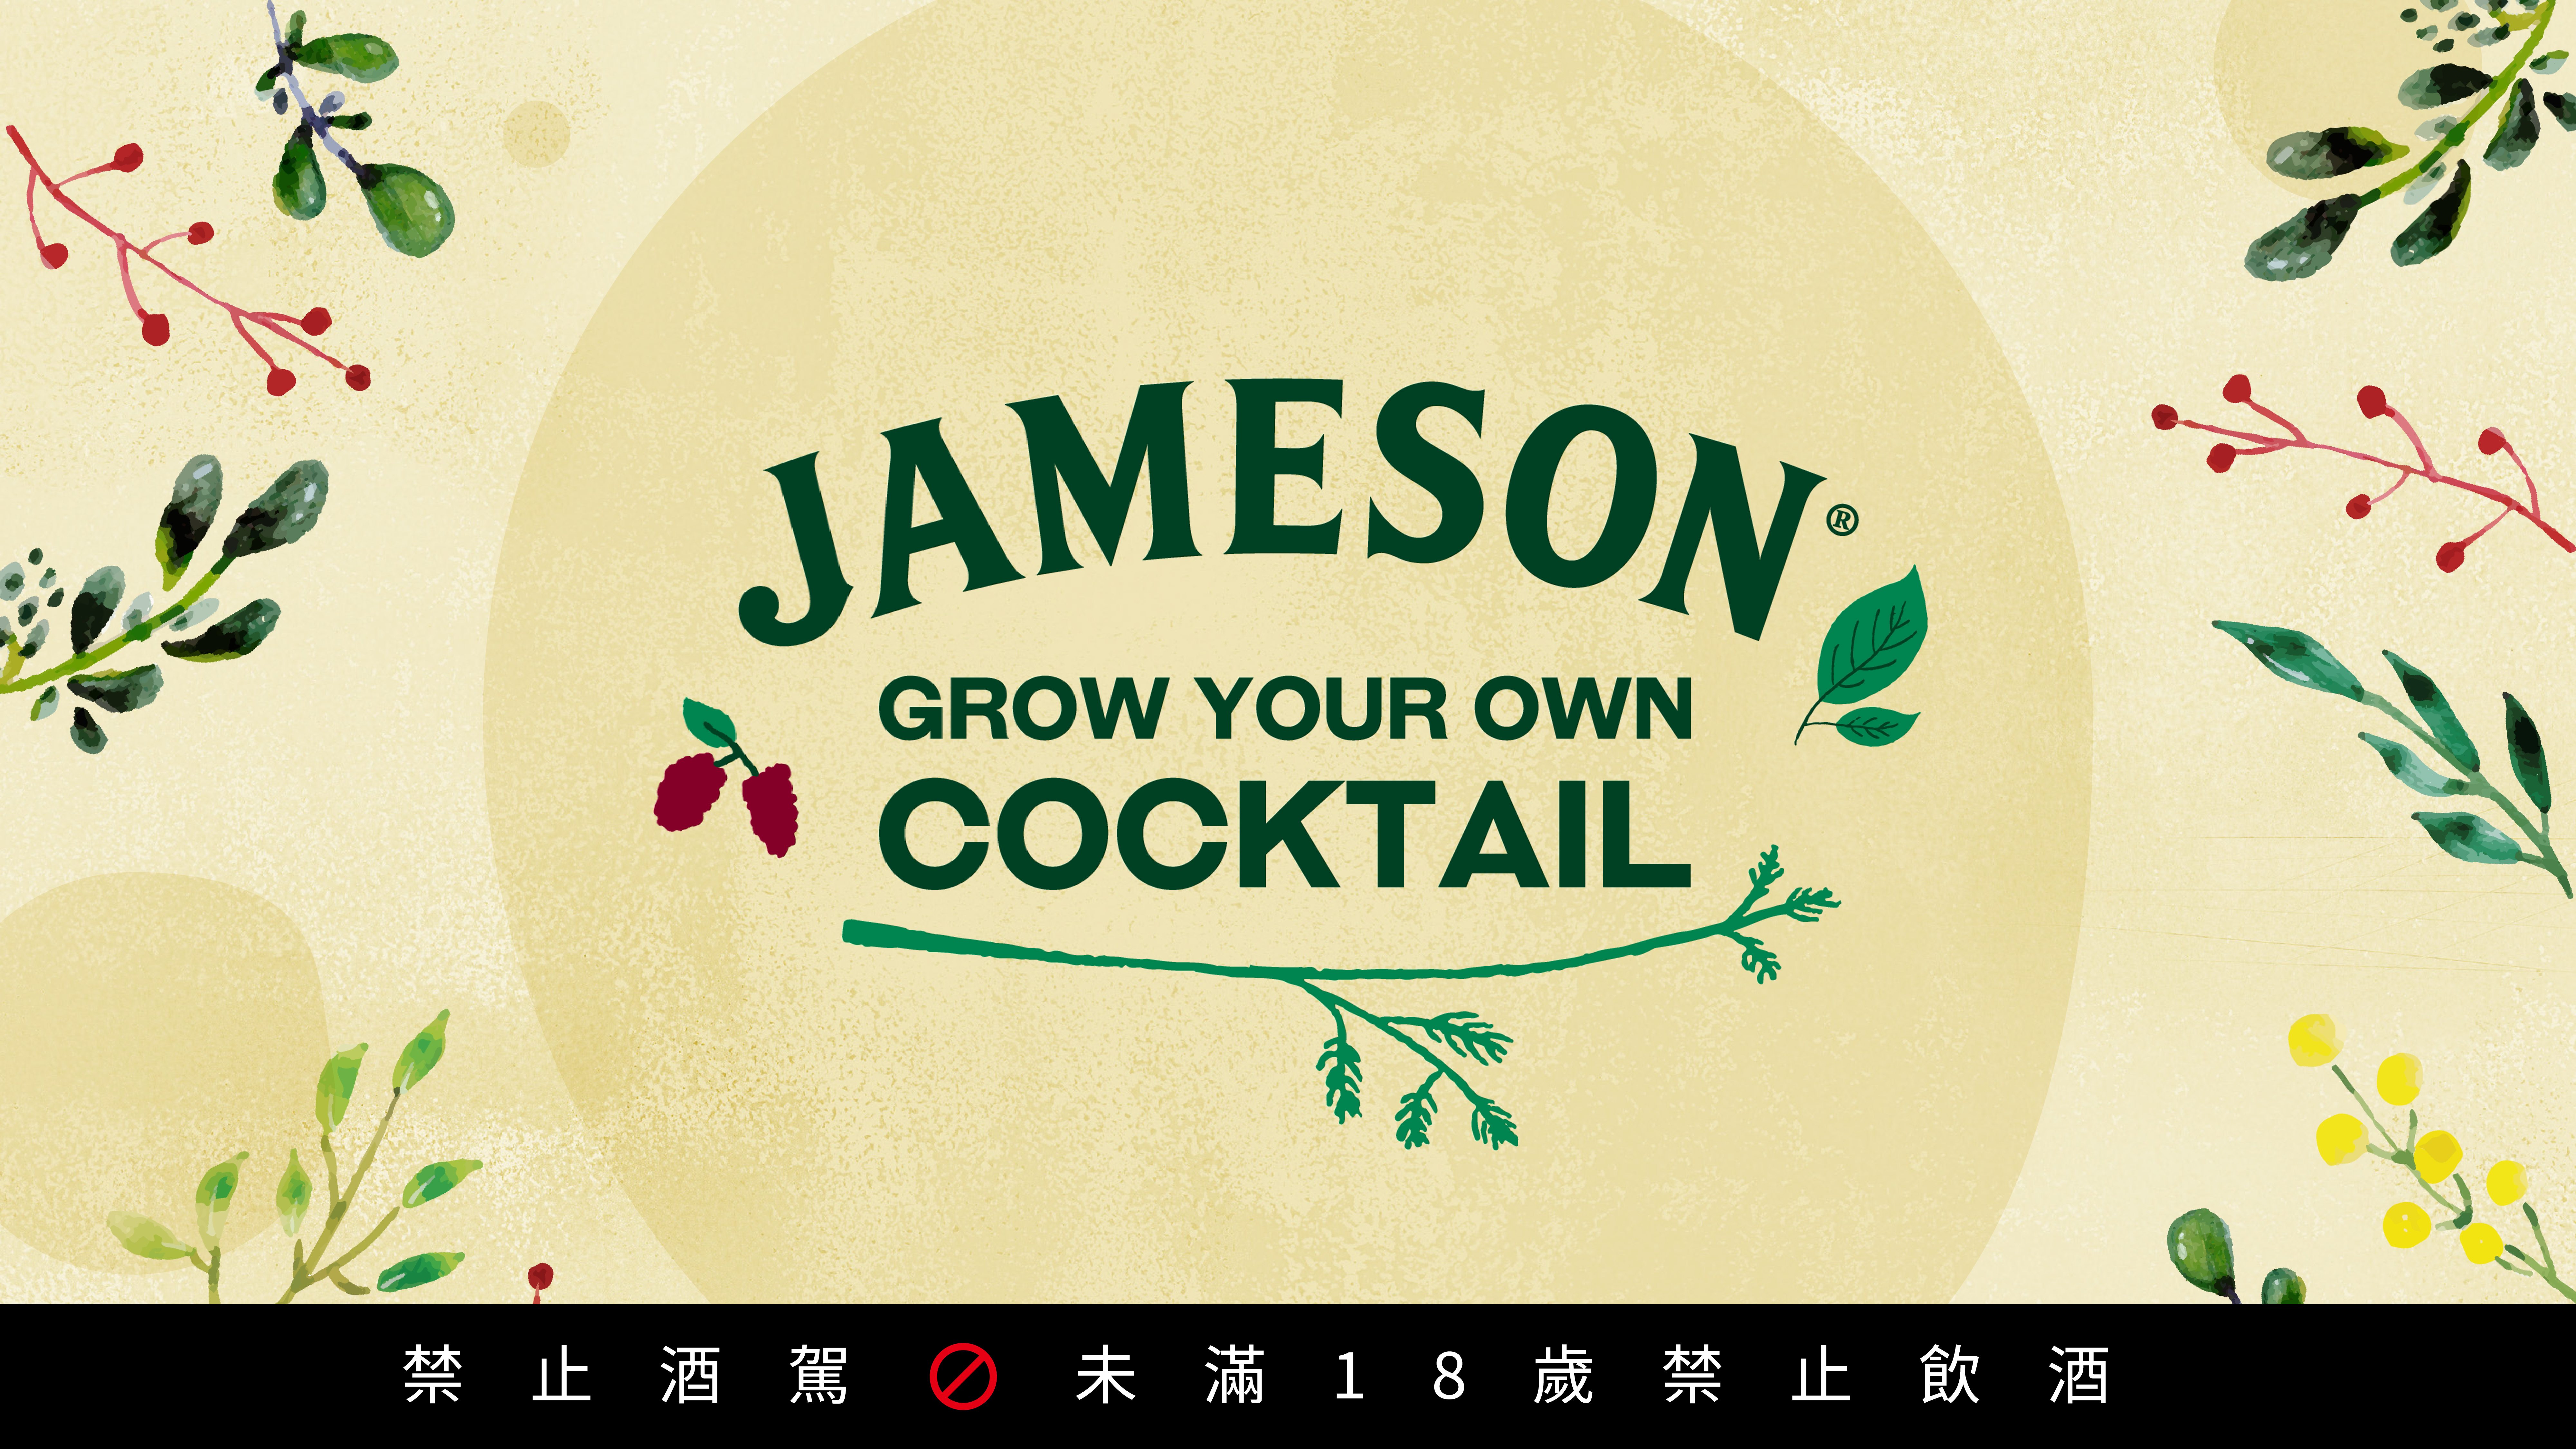 【JAMESON GROW YOUR OWN COCKTAIL 永續調酒跑吧活動】